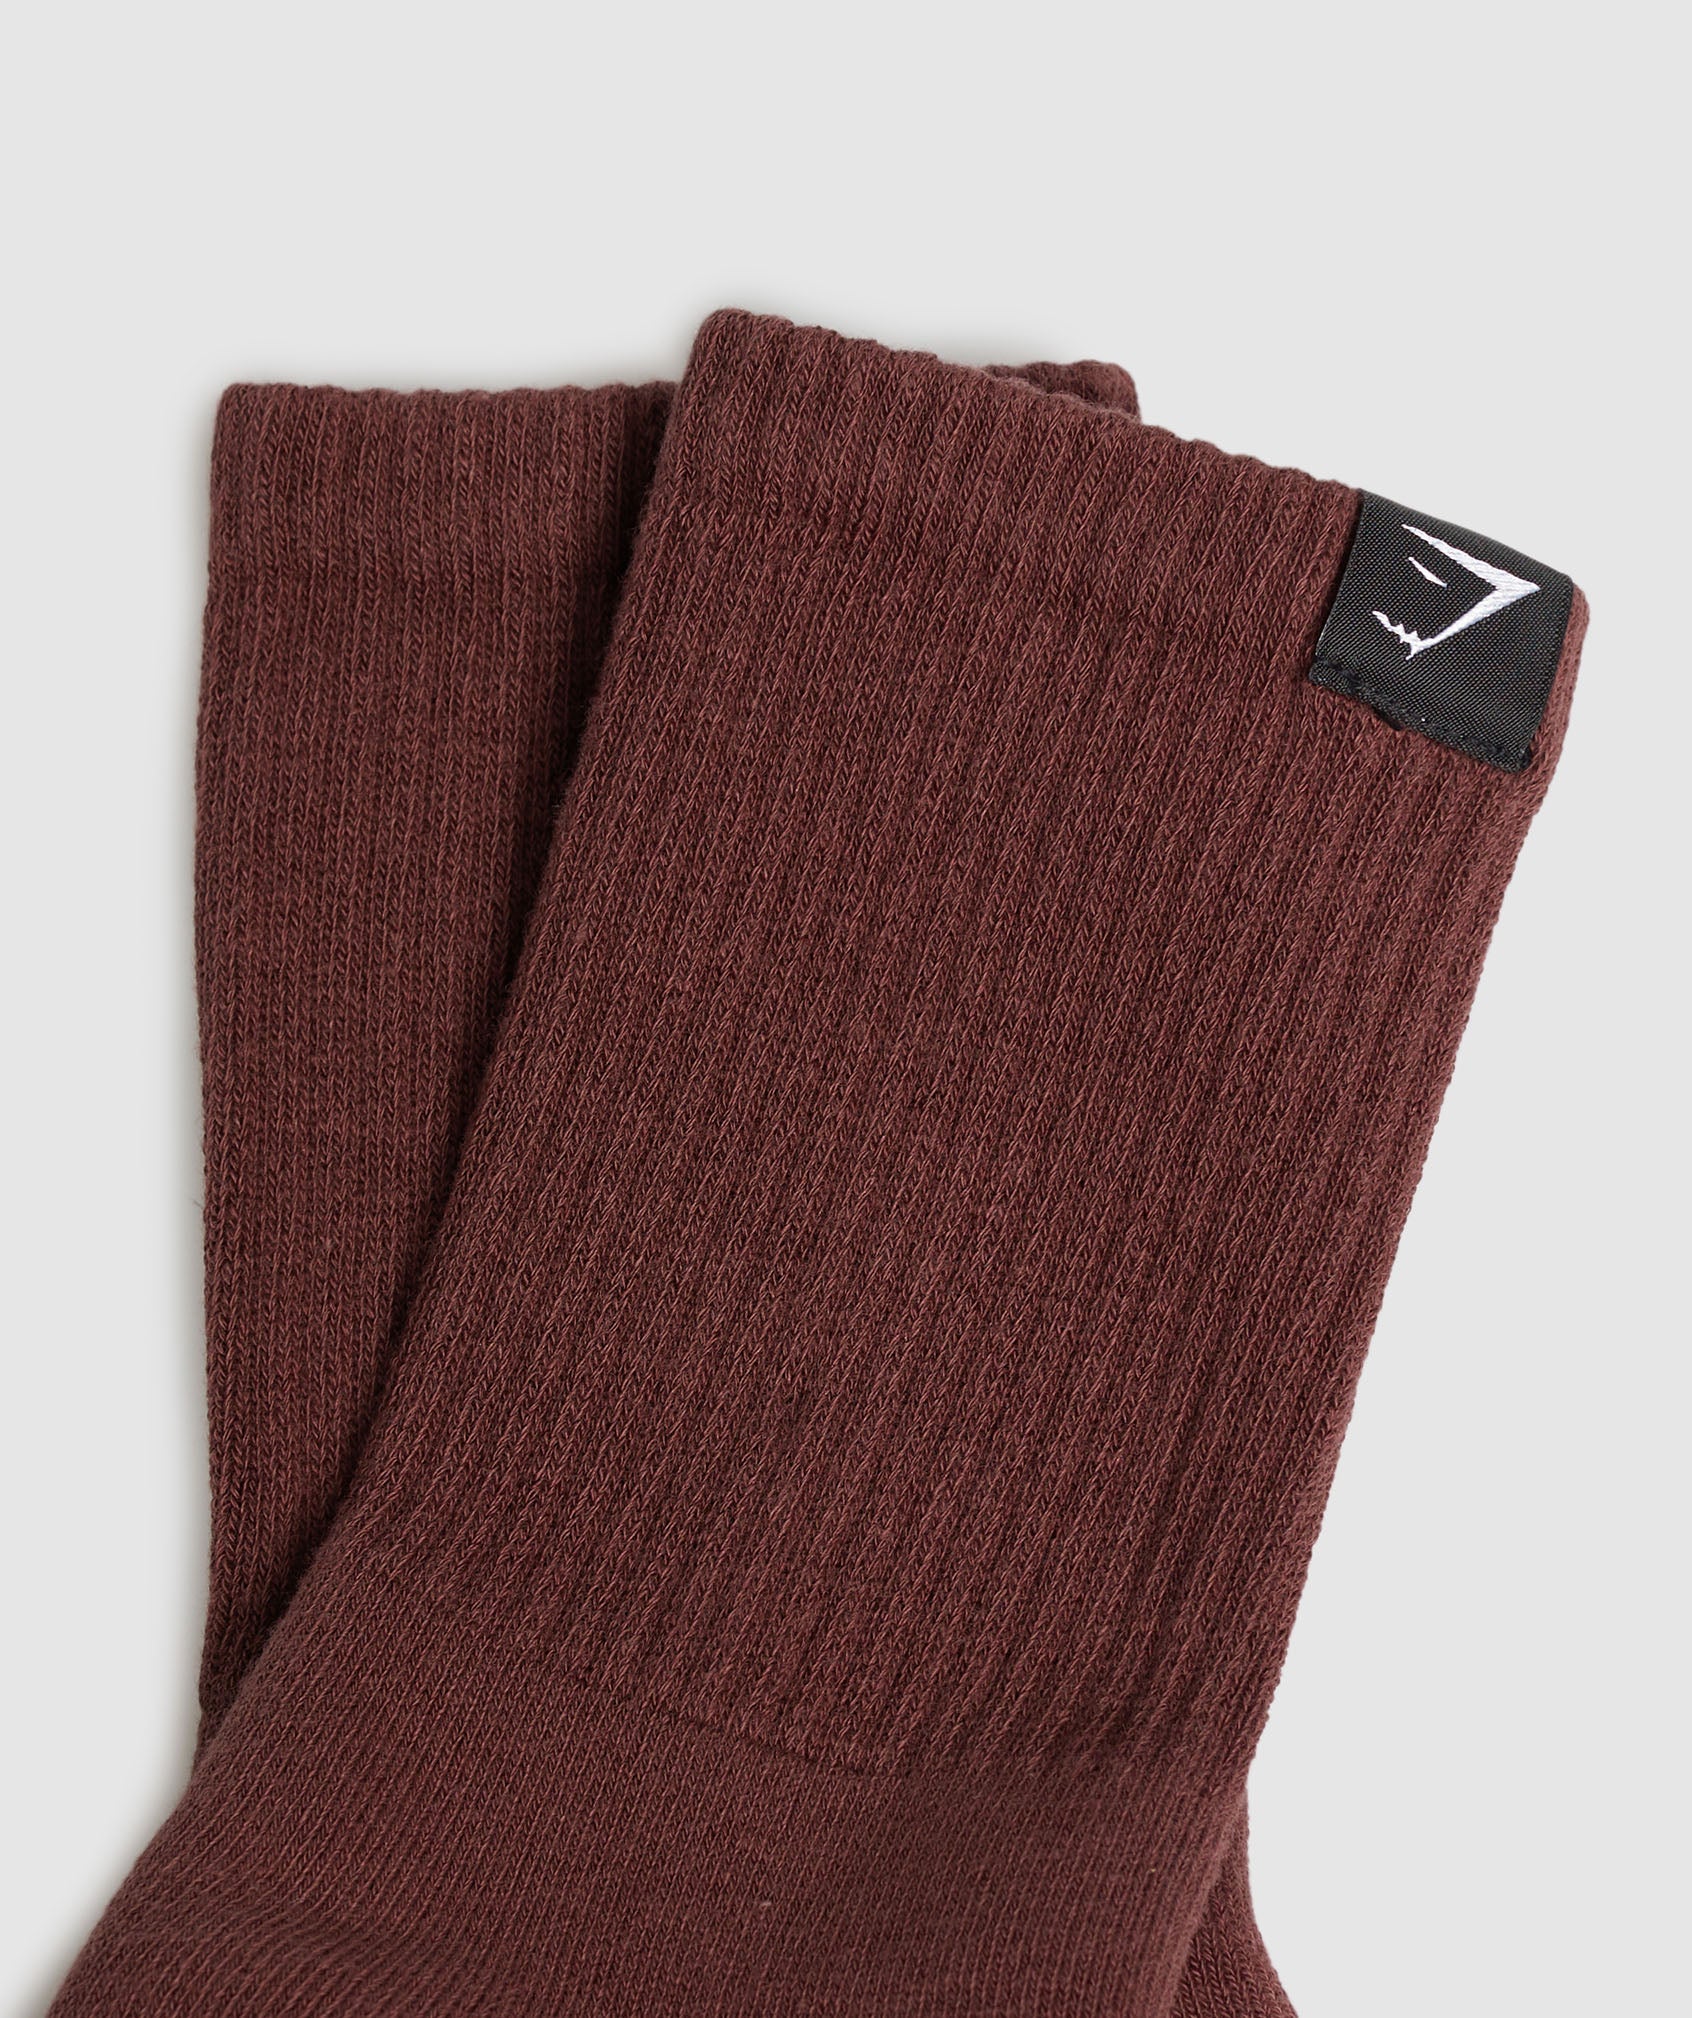 Premium Combed Cotton Single in Burgundy Brown - view 2